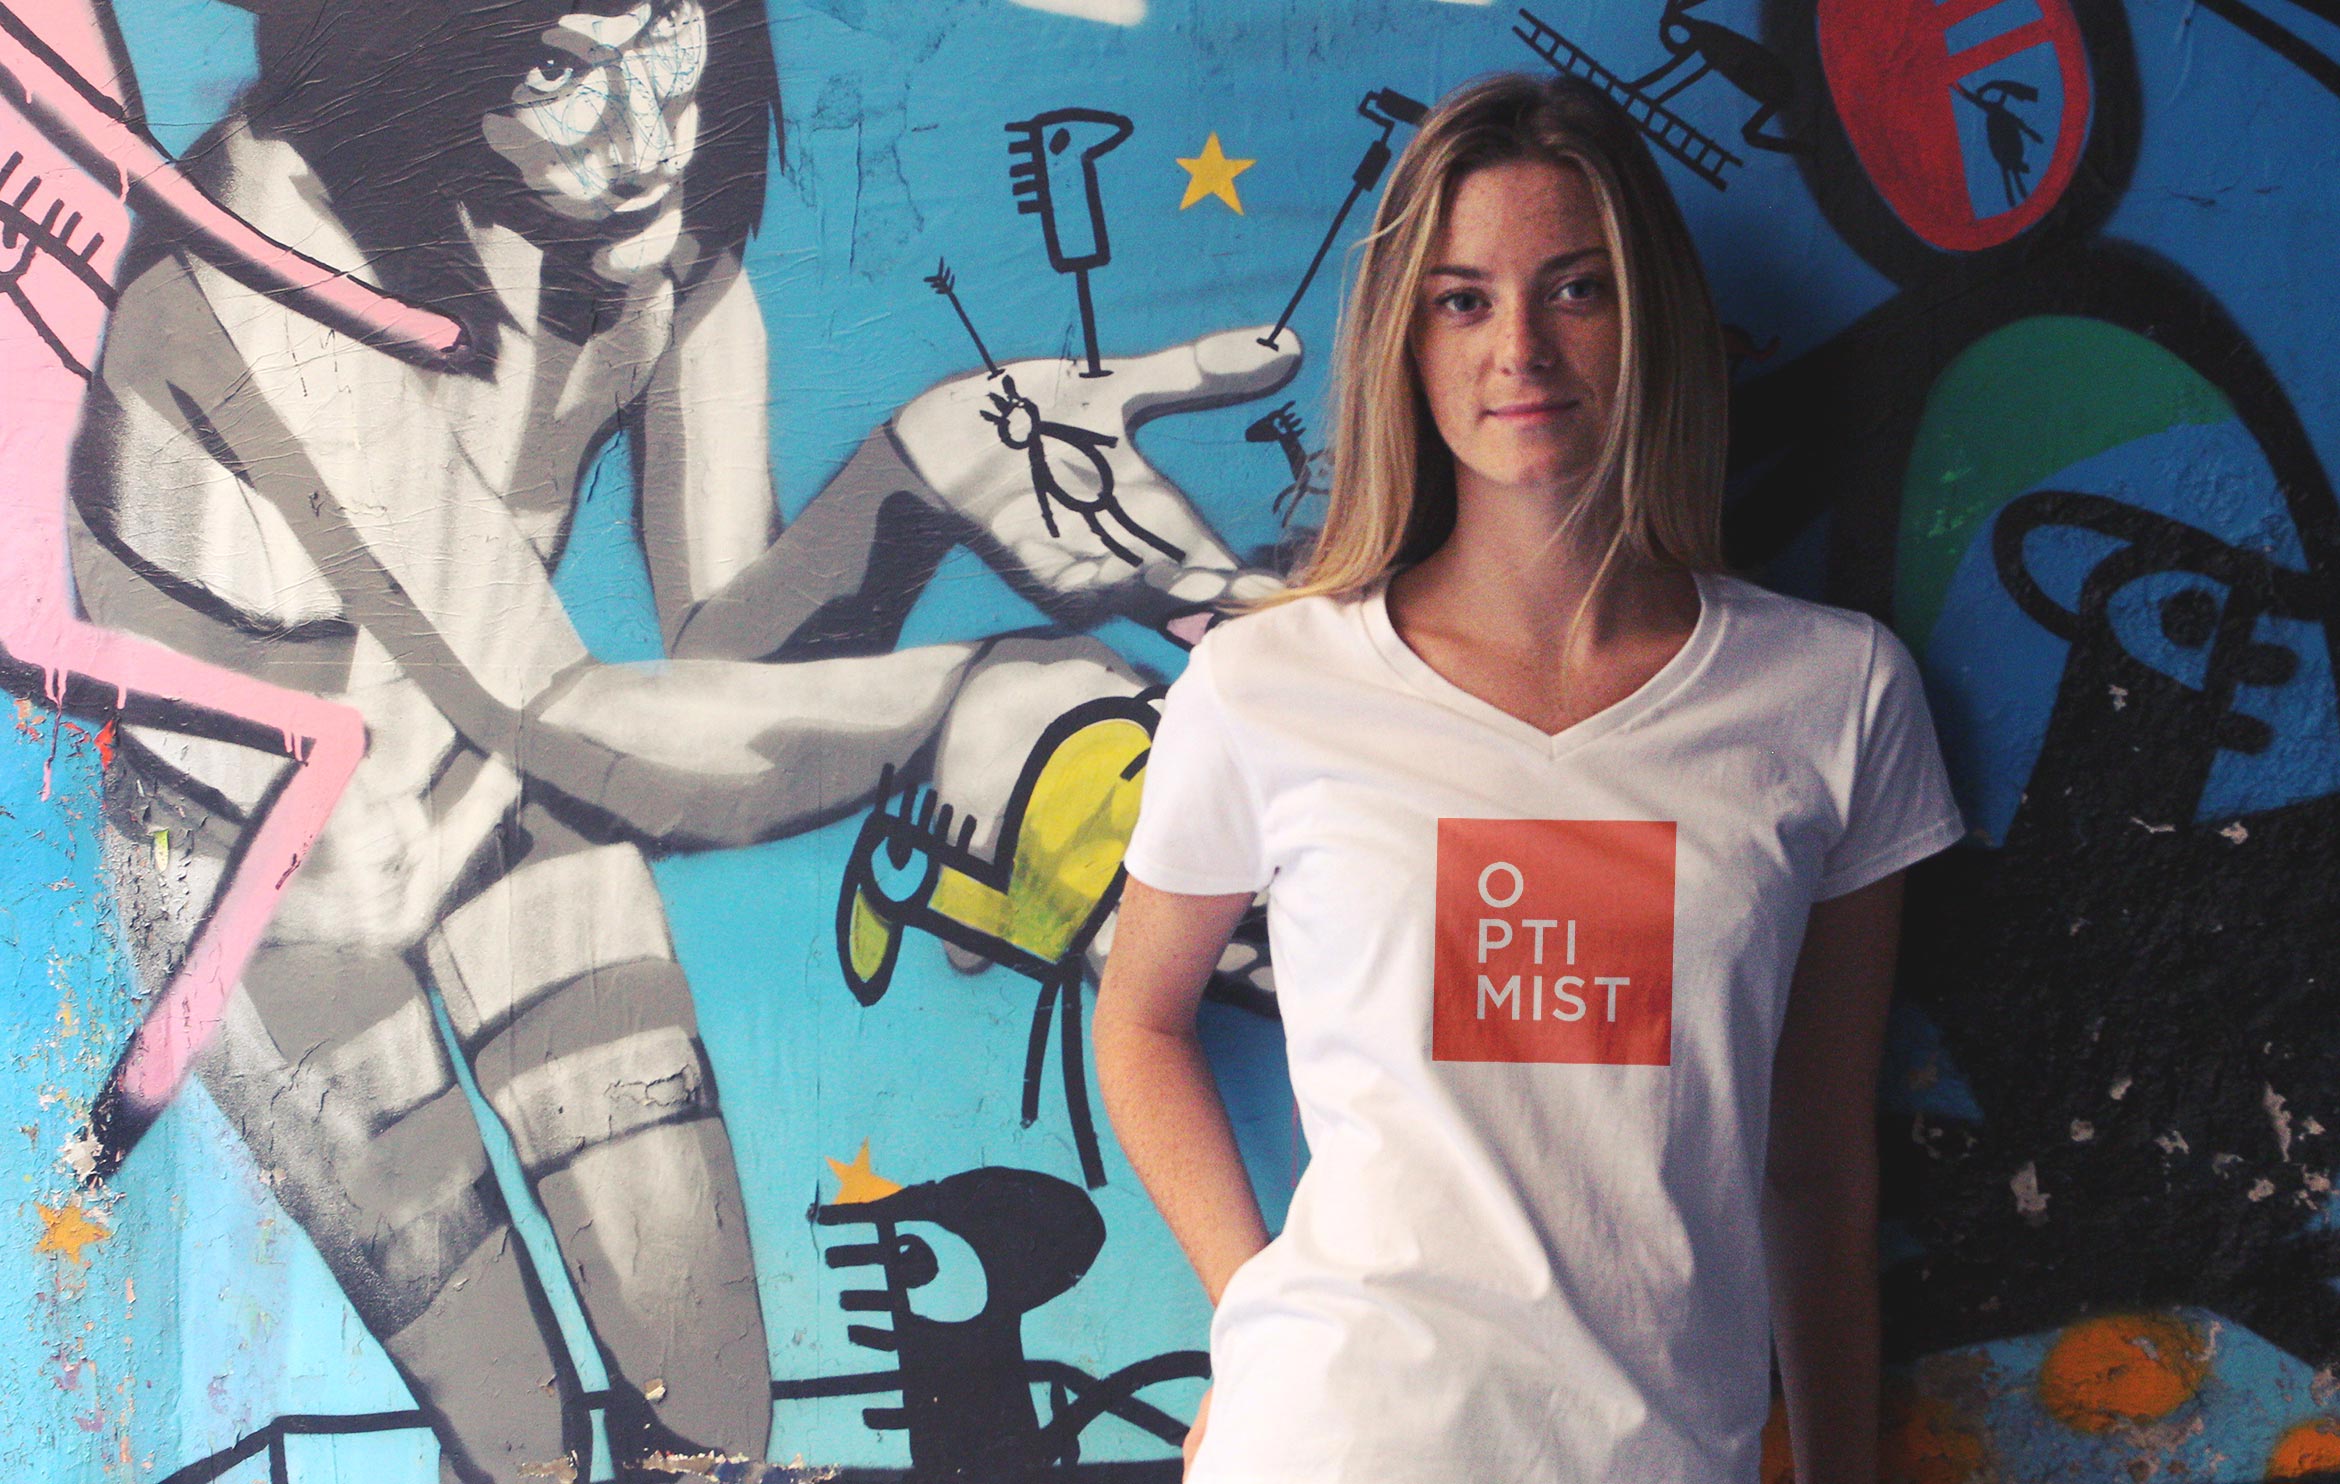 young blond woman wearing a white tee shirt with orange optimist logo in front of a graffiti wall